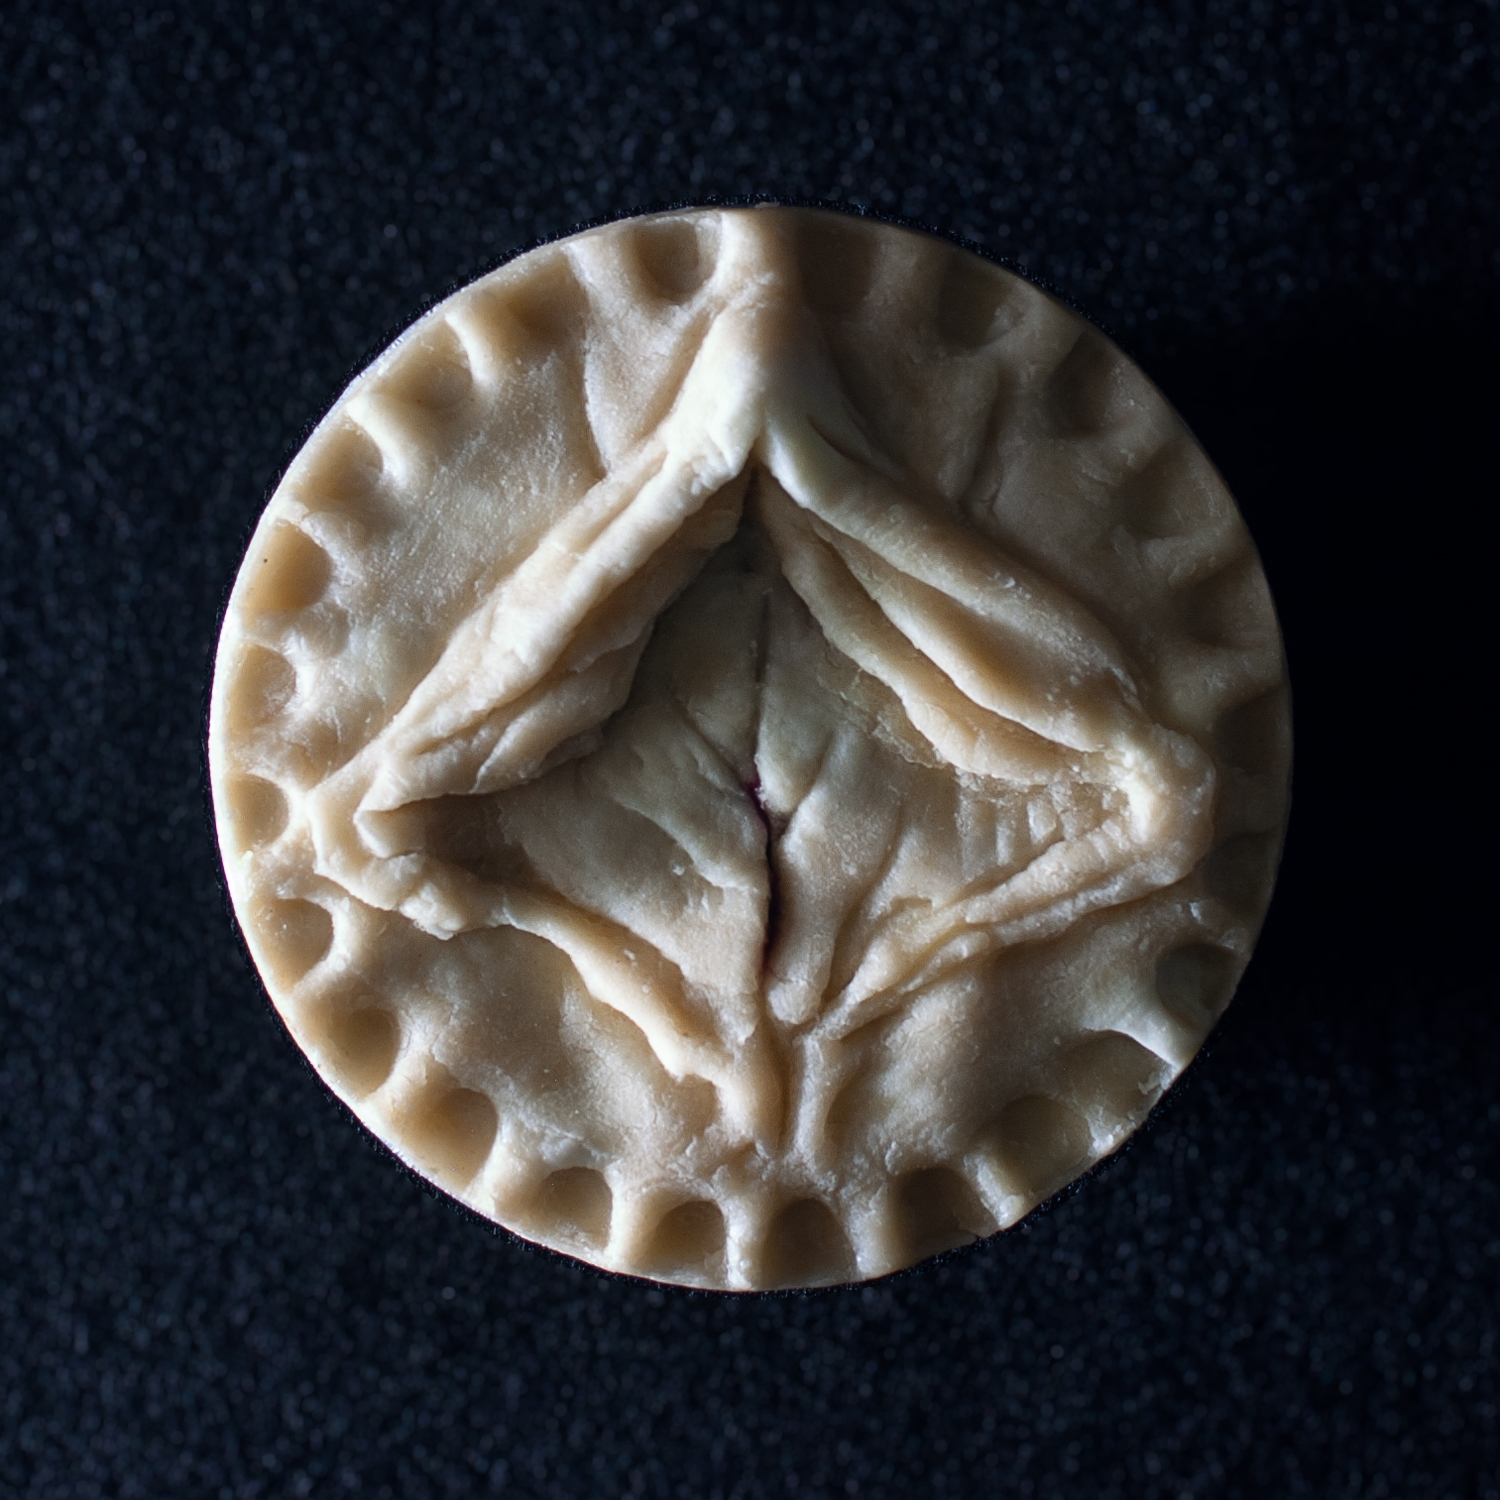 Pie 9, a pie sculpted to appear like a vulva